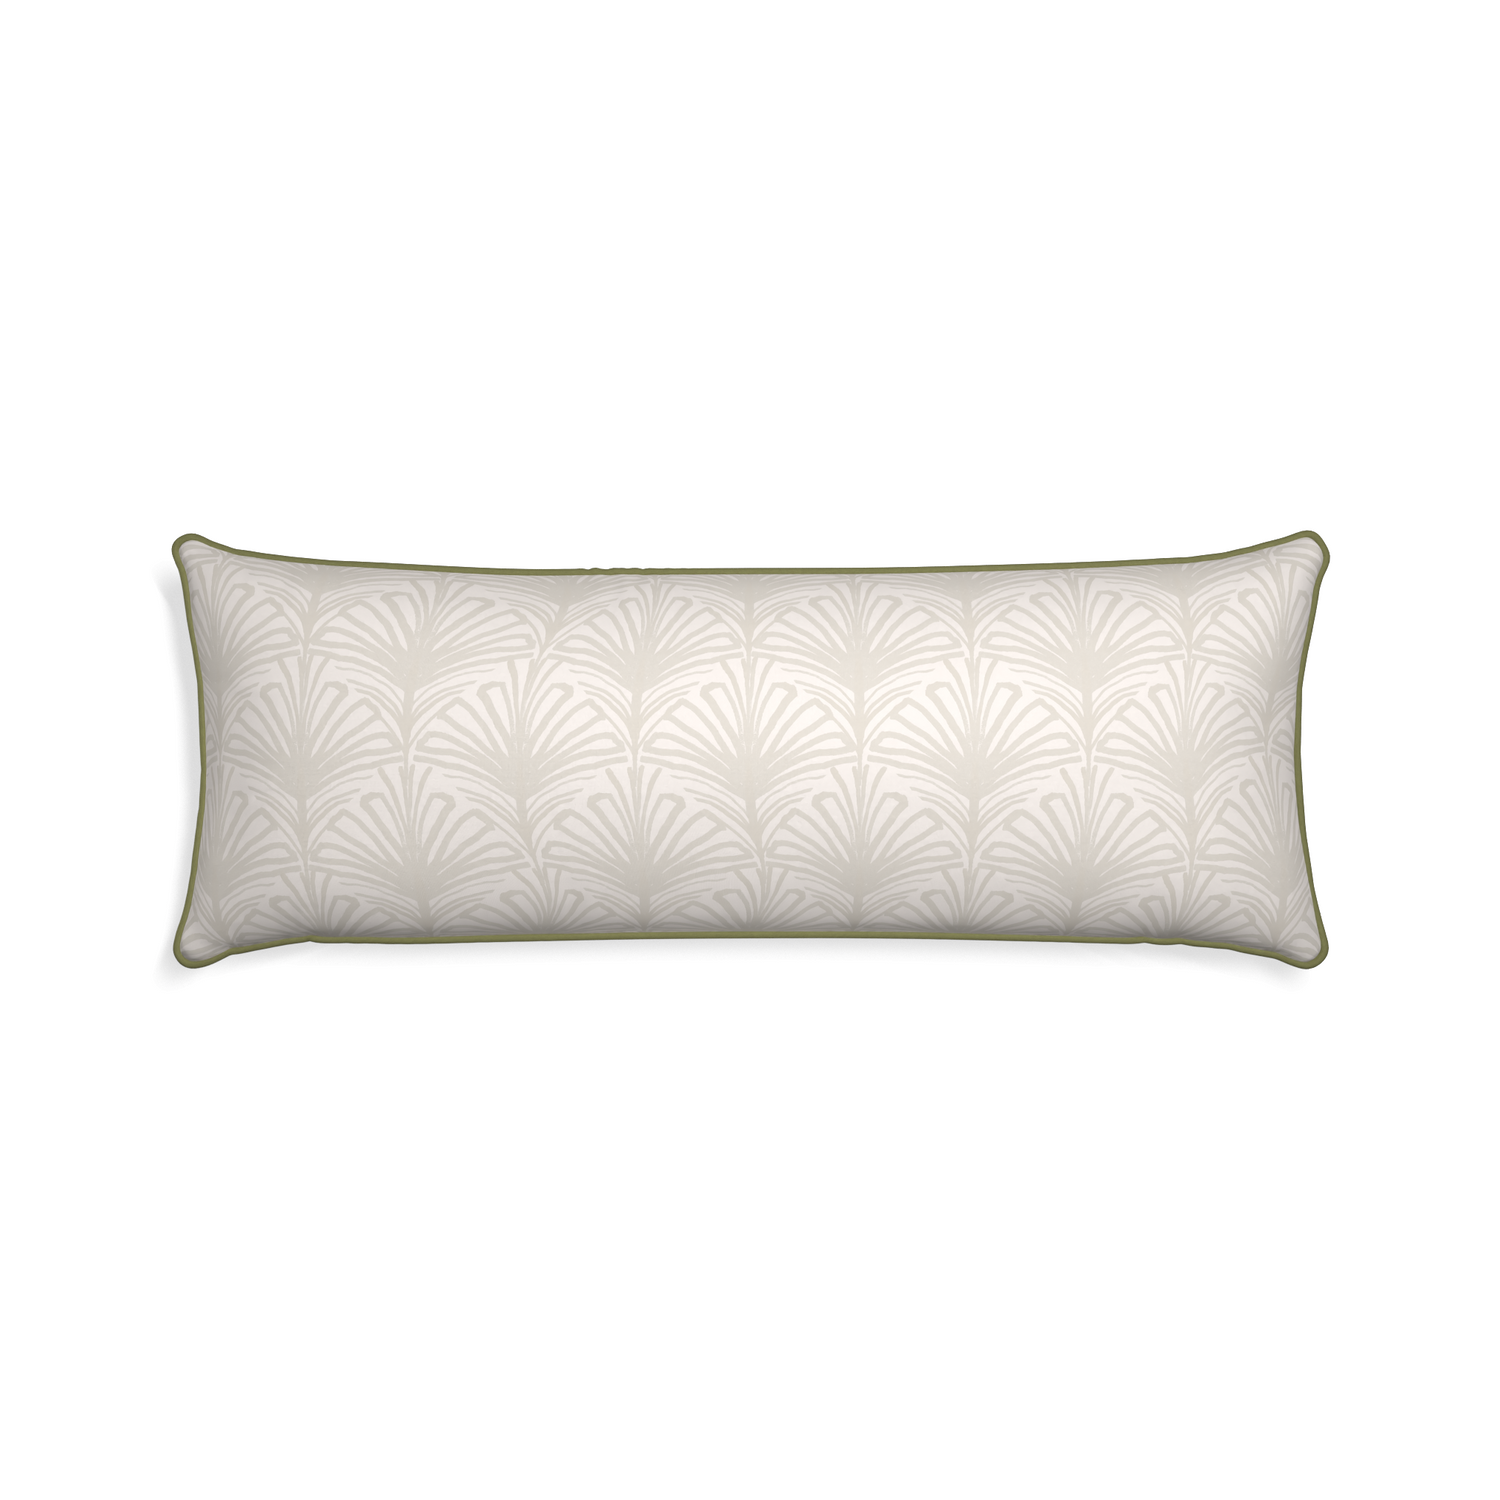 Xl-lumbar suzy sand custom beige palmpillow with moss piping on white background